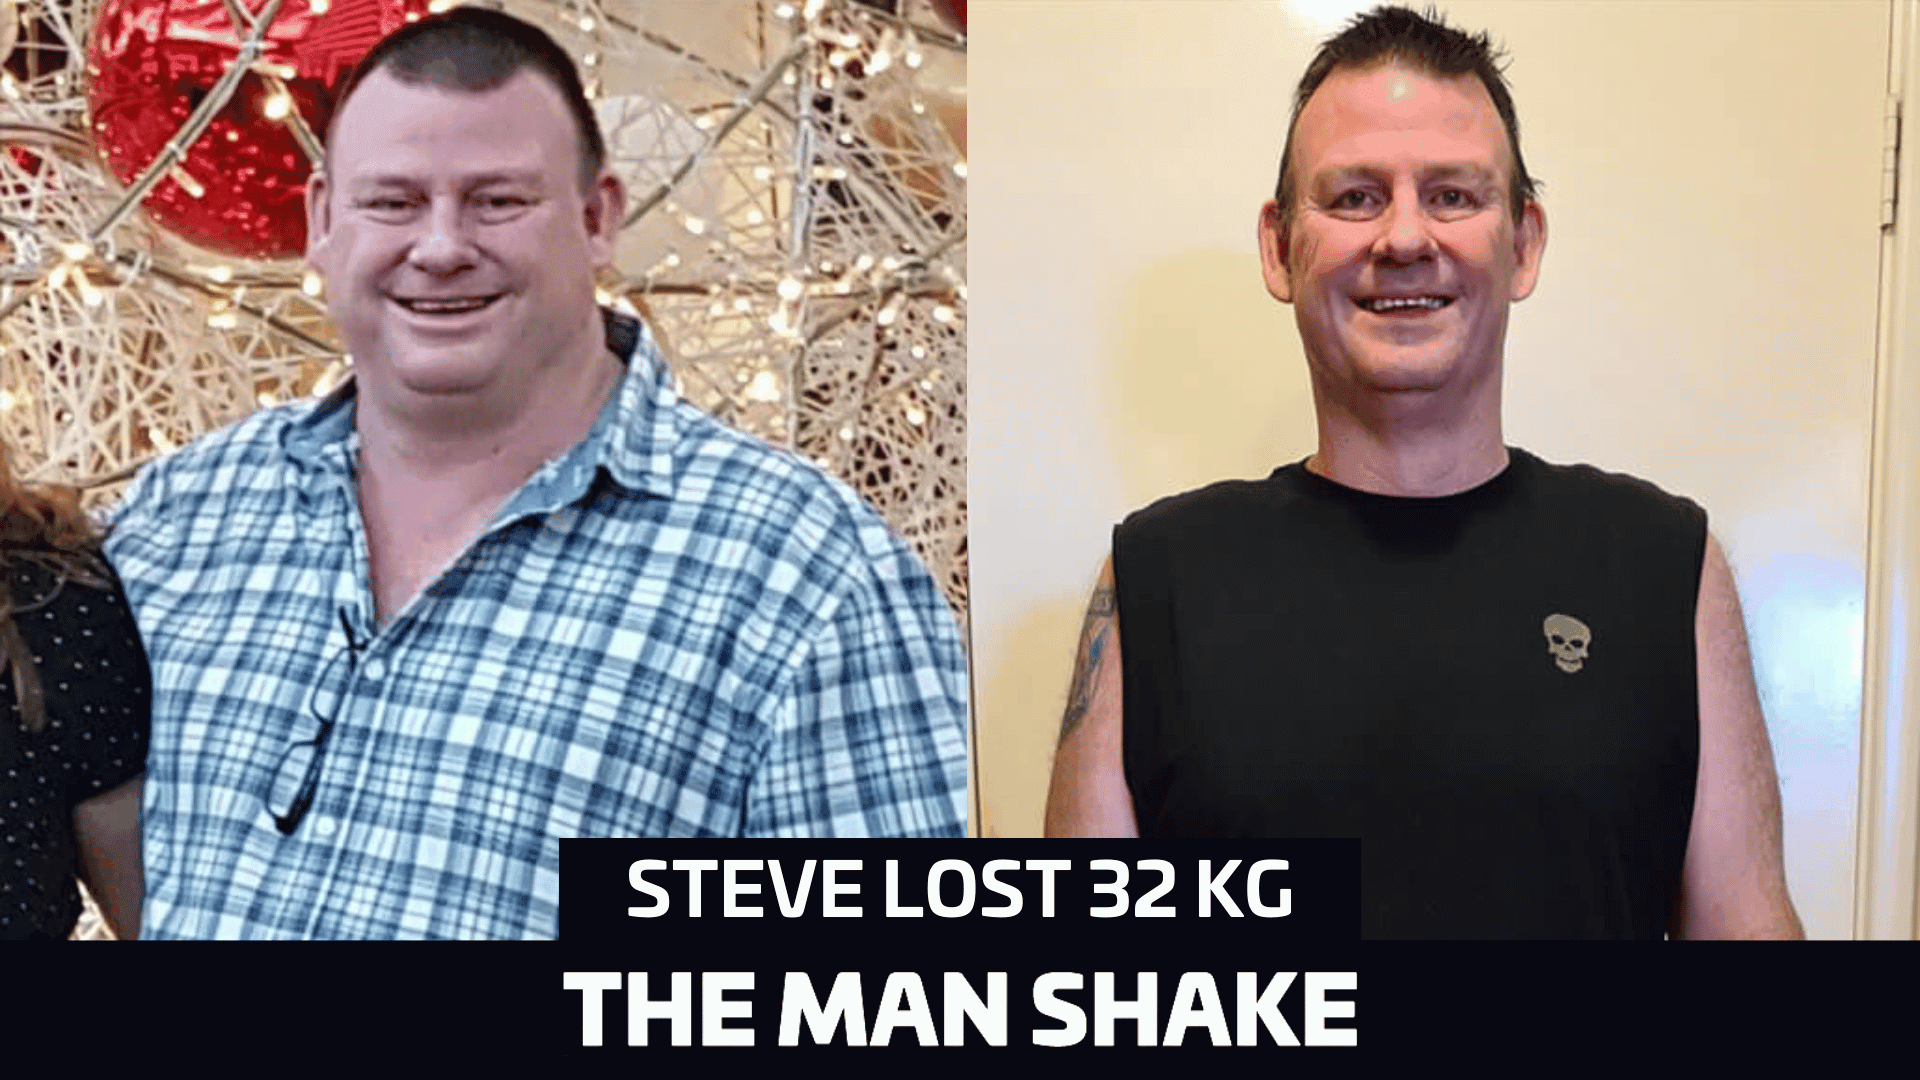 Steve lost 32kg after he ran out of options